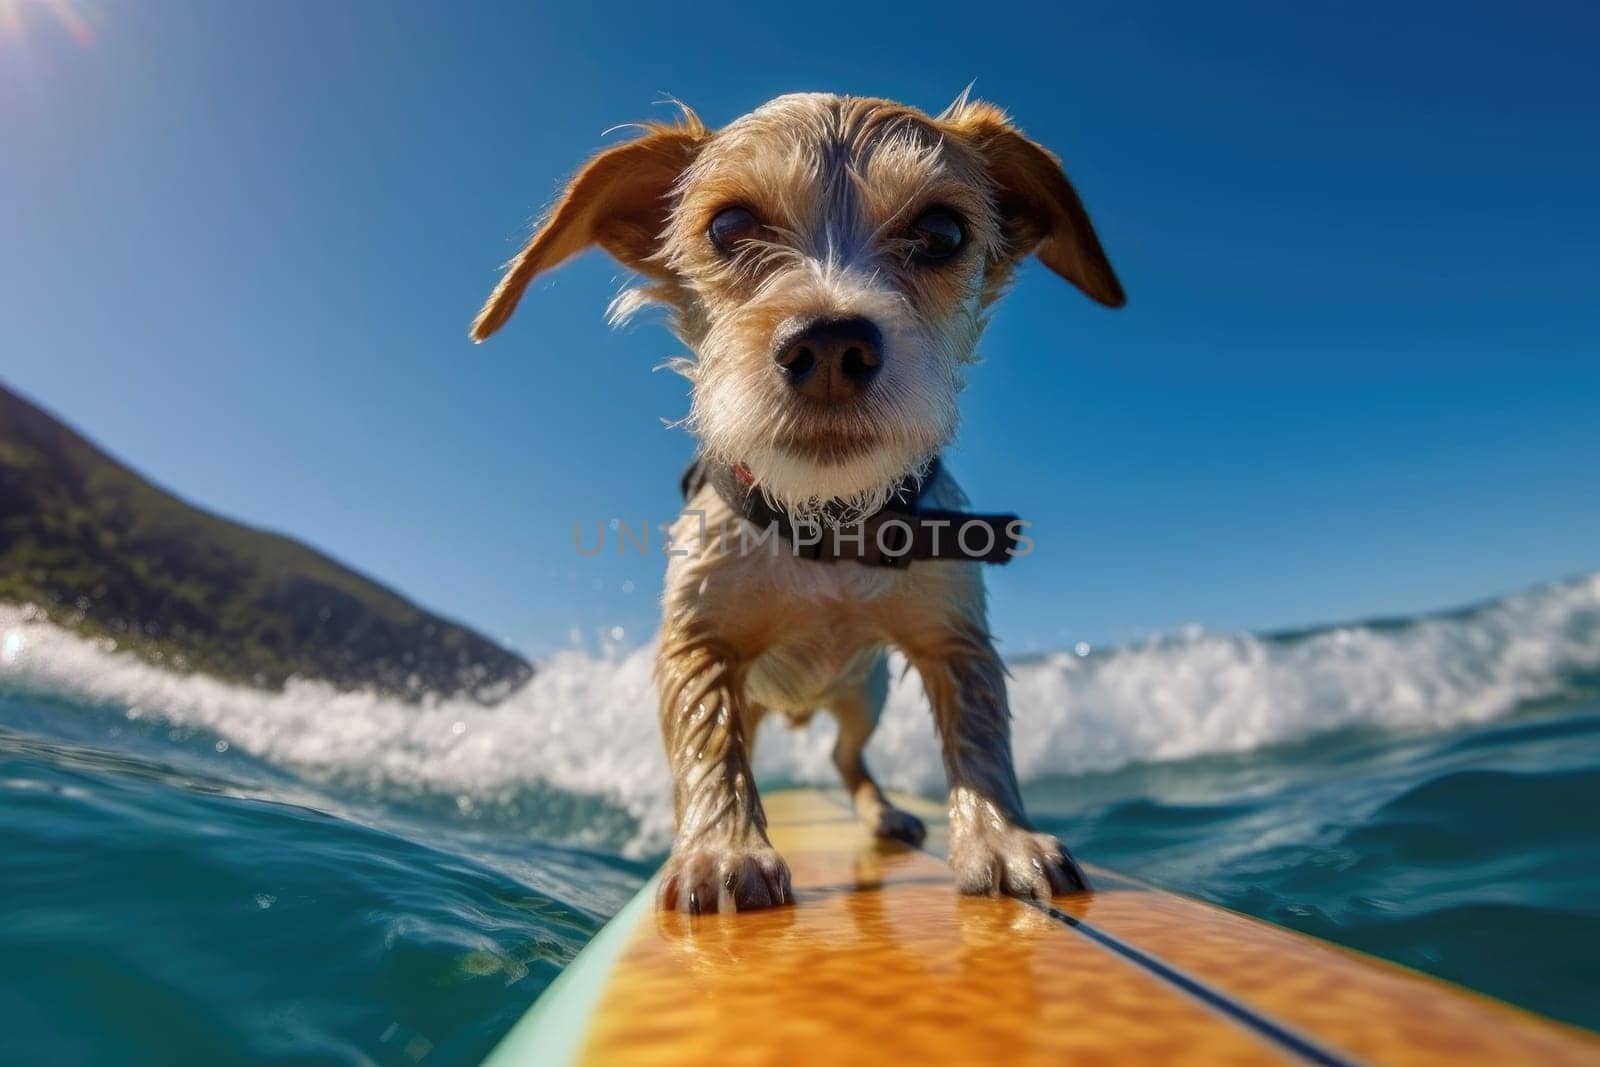 dog on a sup board. Summer sport ai generated